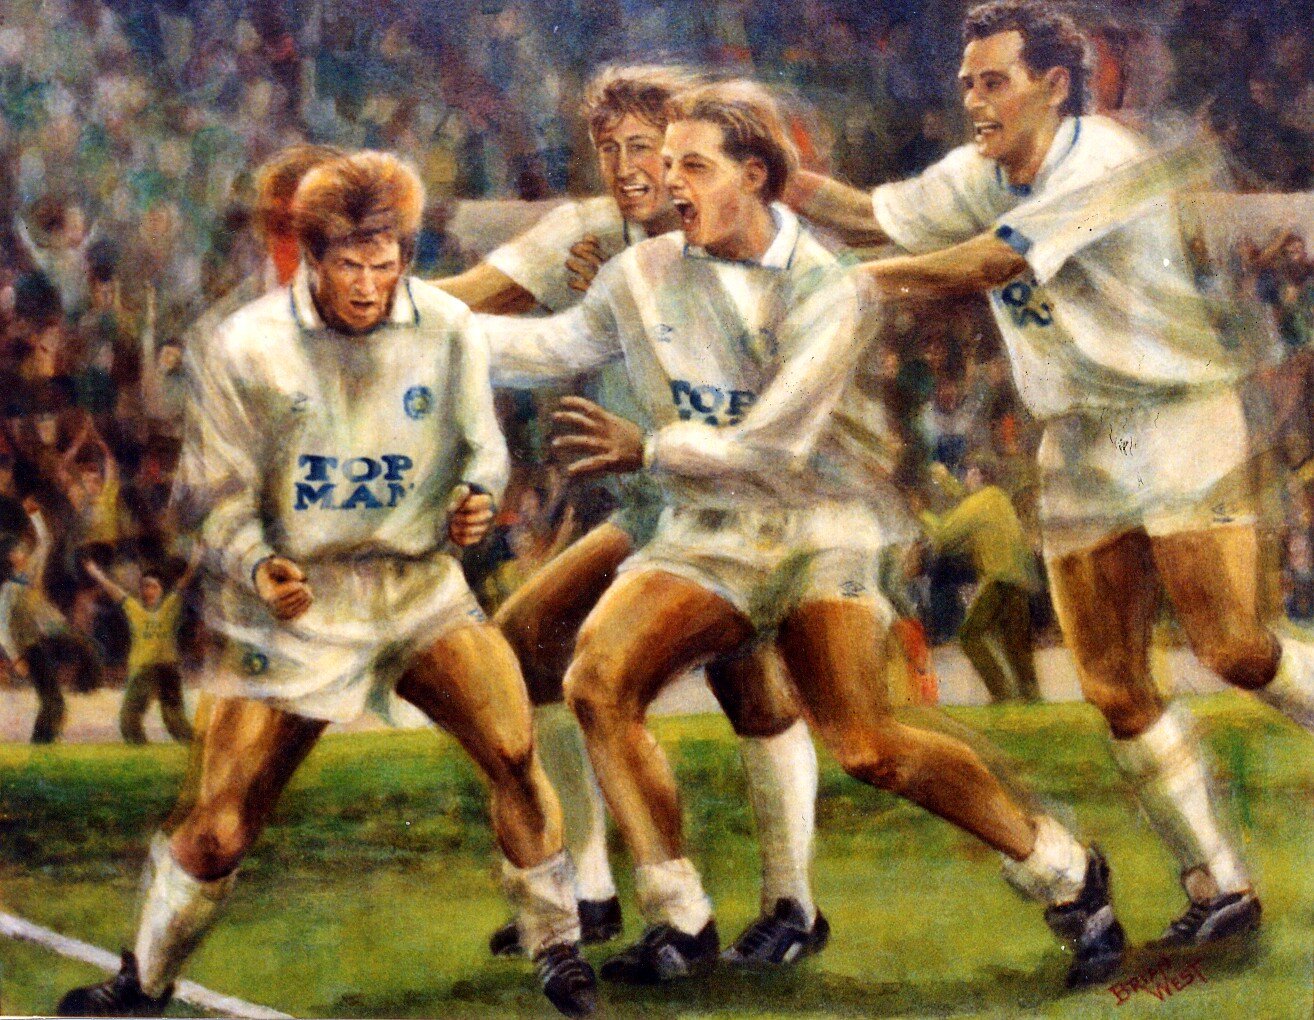 Gordon Strachan OBE. Leeds &amp; Scotland. His favourite moment securing promotion to Div 1 for Leeds United FC.